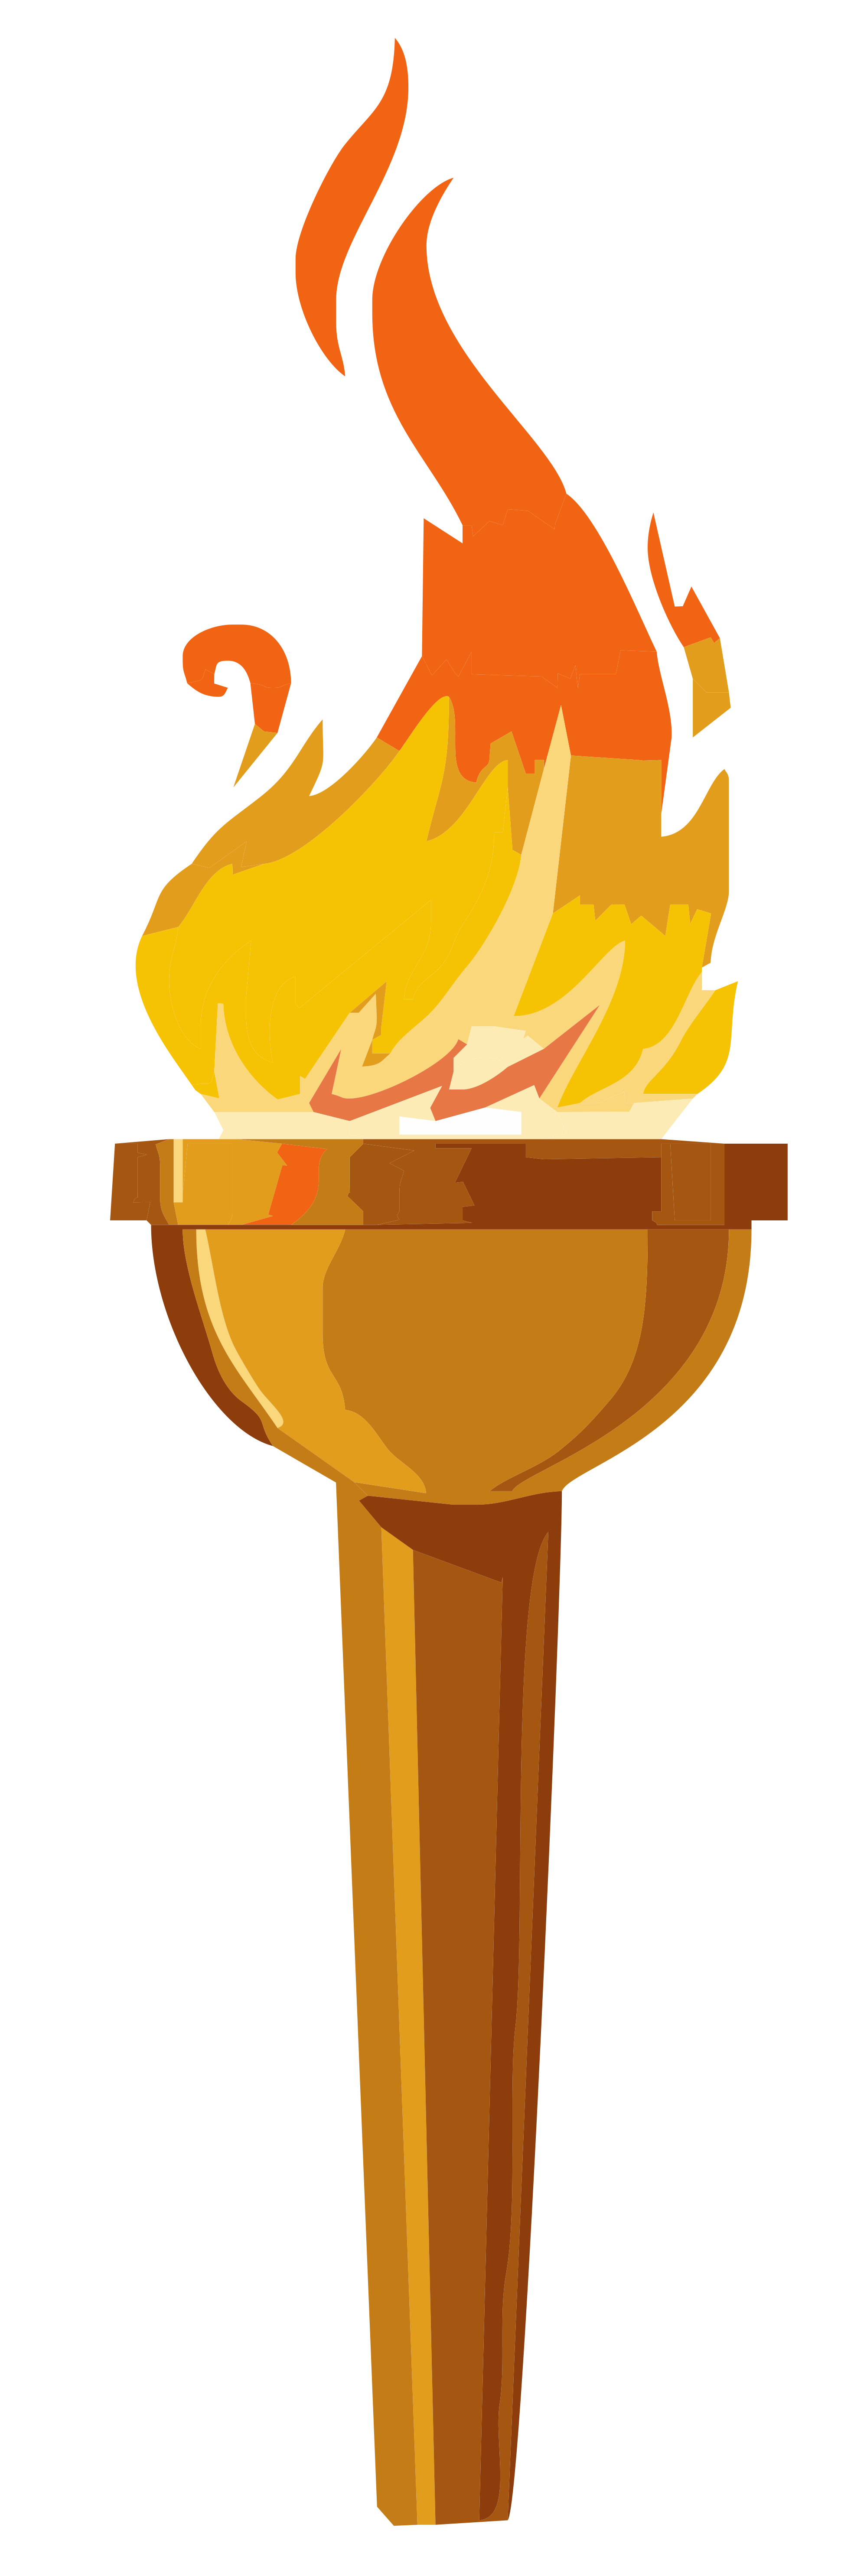 Olympic Torch PNG Images